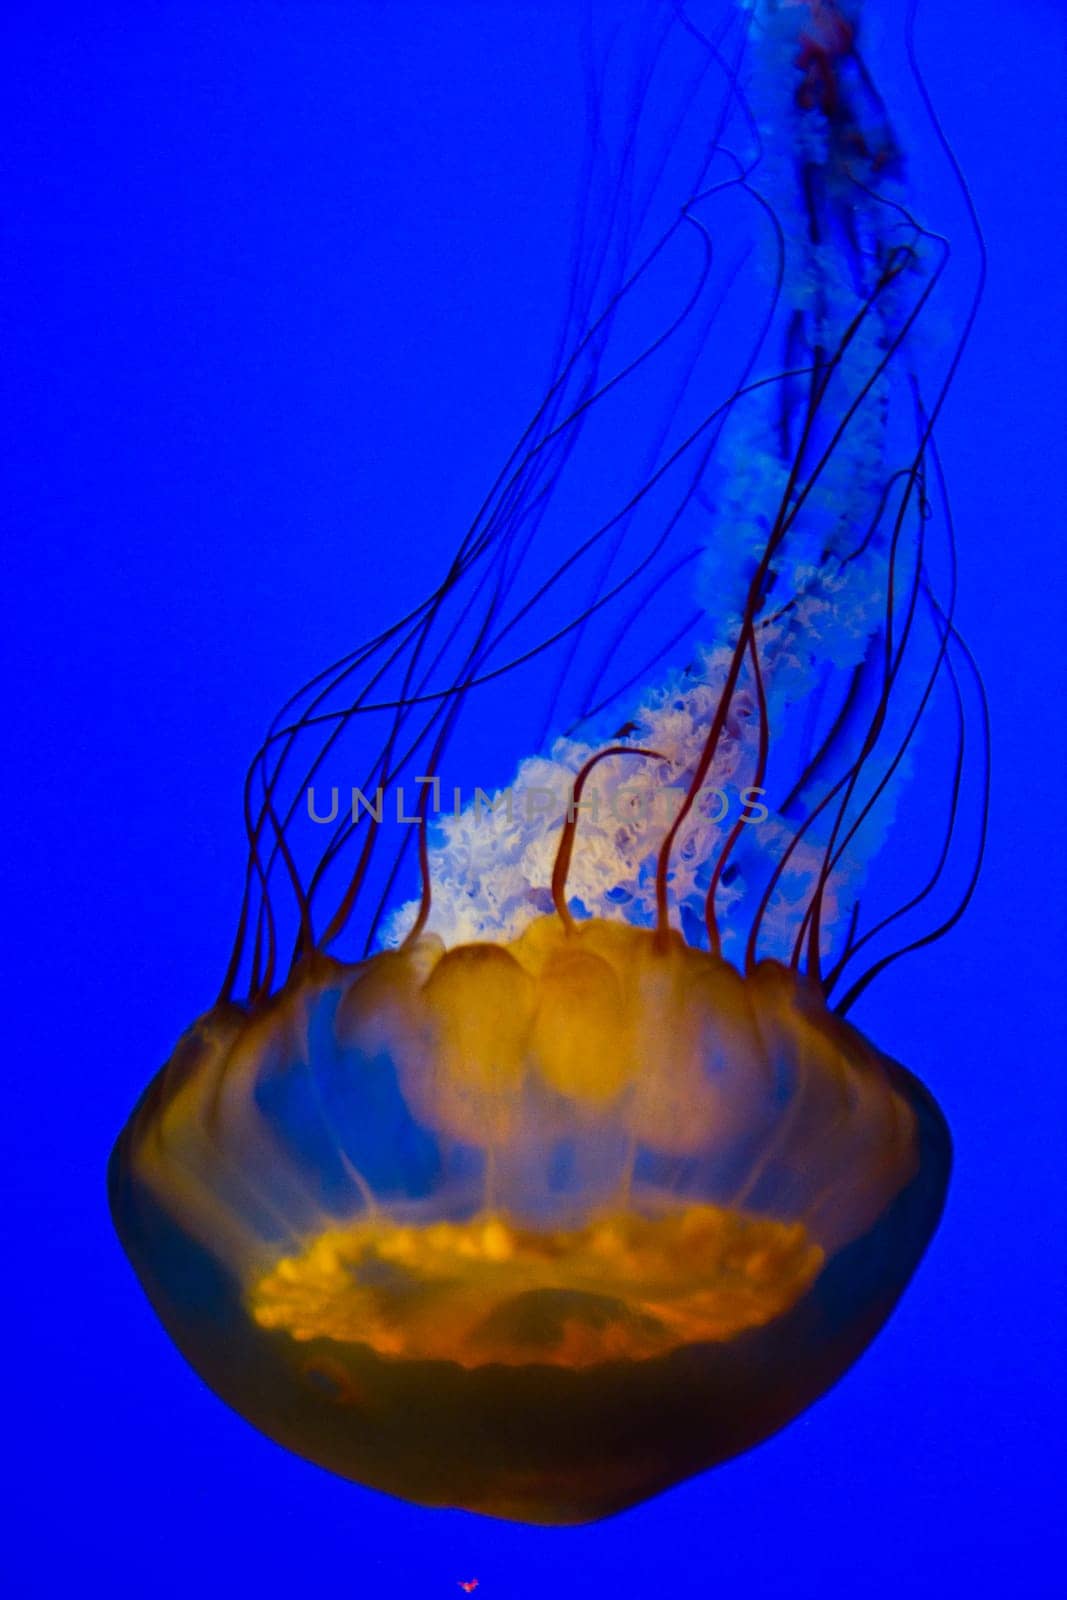 Captivating golden jellyfish gracefully drifts in the clear blue waters of an aquarium, its delicate tentacles trailing behind. A mesmerizing display of marine beauty, ideal for showcasing the wonders of nature and marine life.